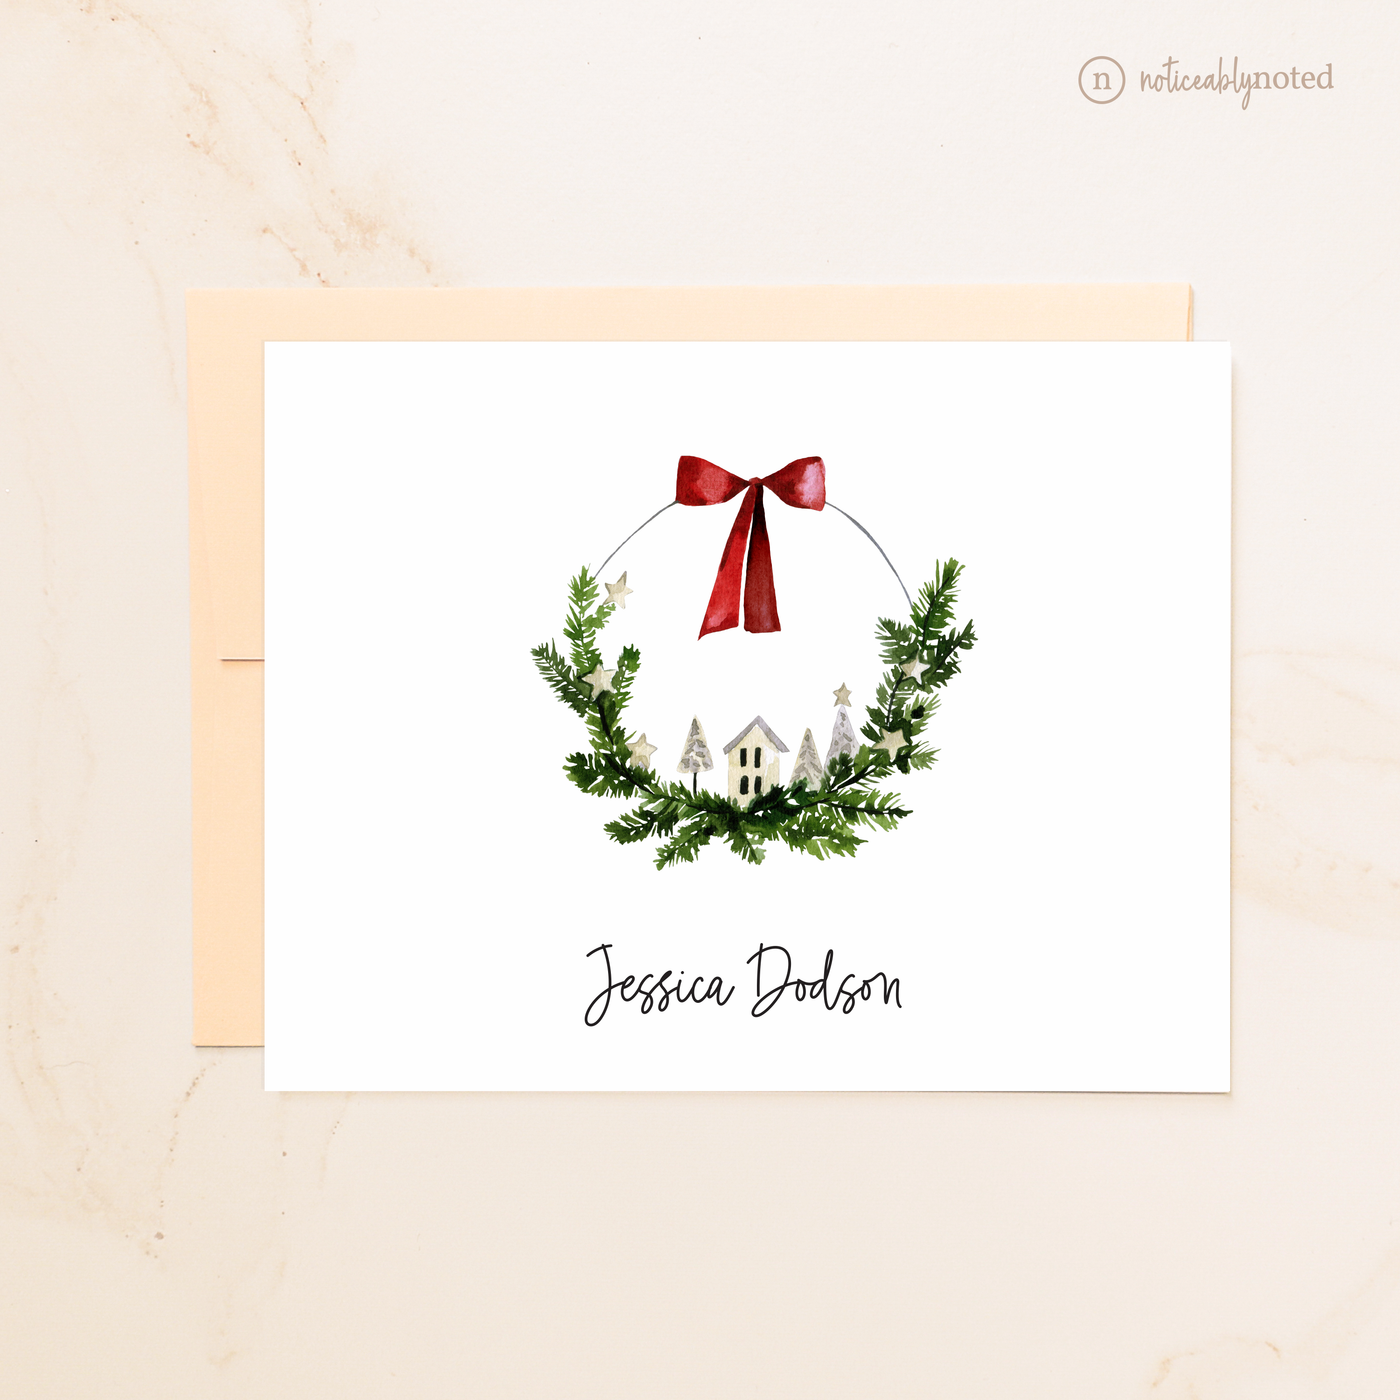 Wreath Folded Cards | Noticeably Noted